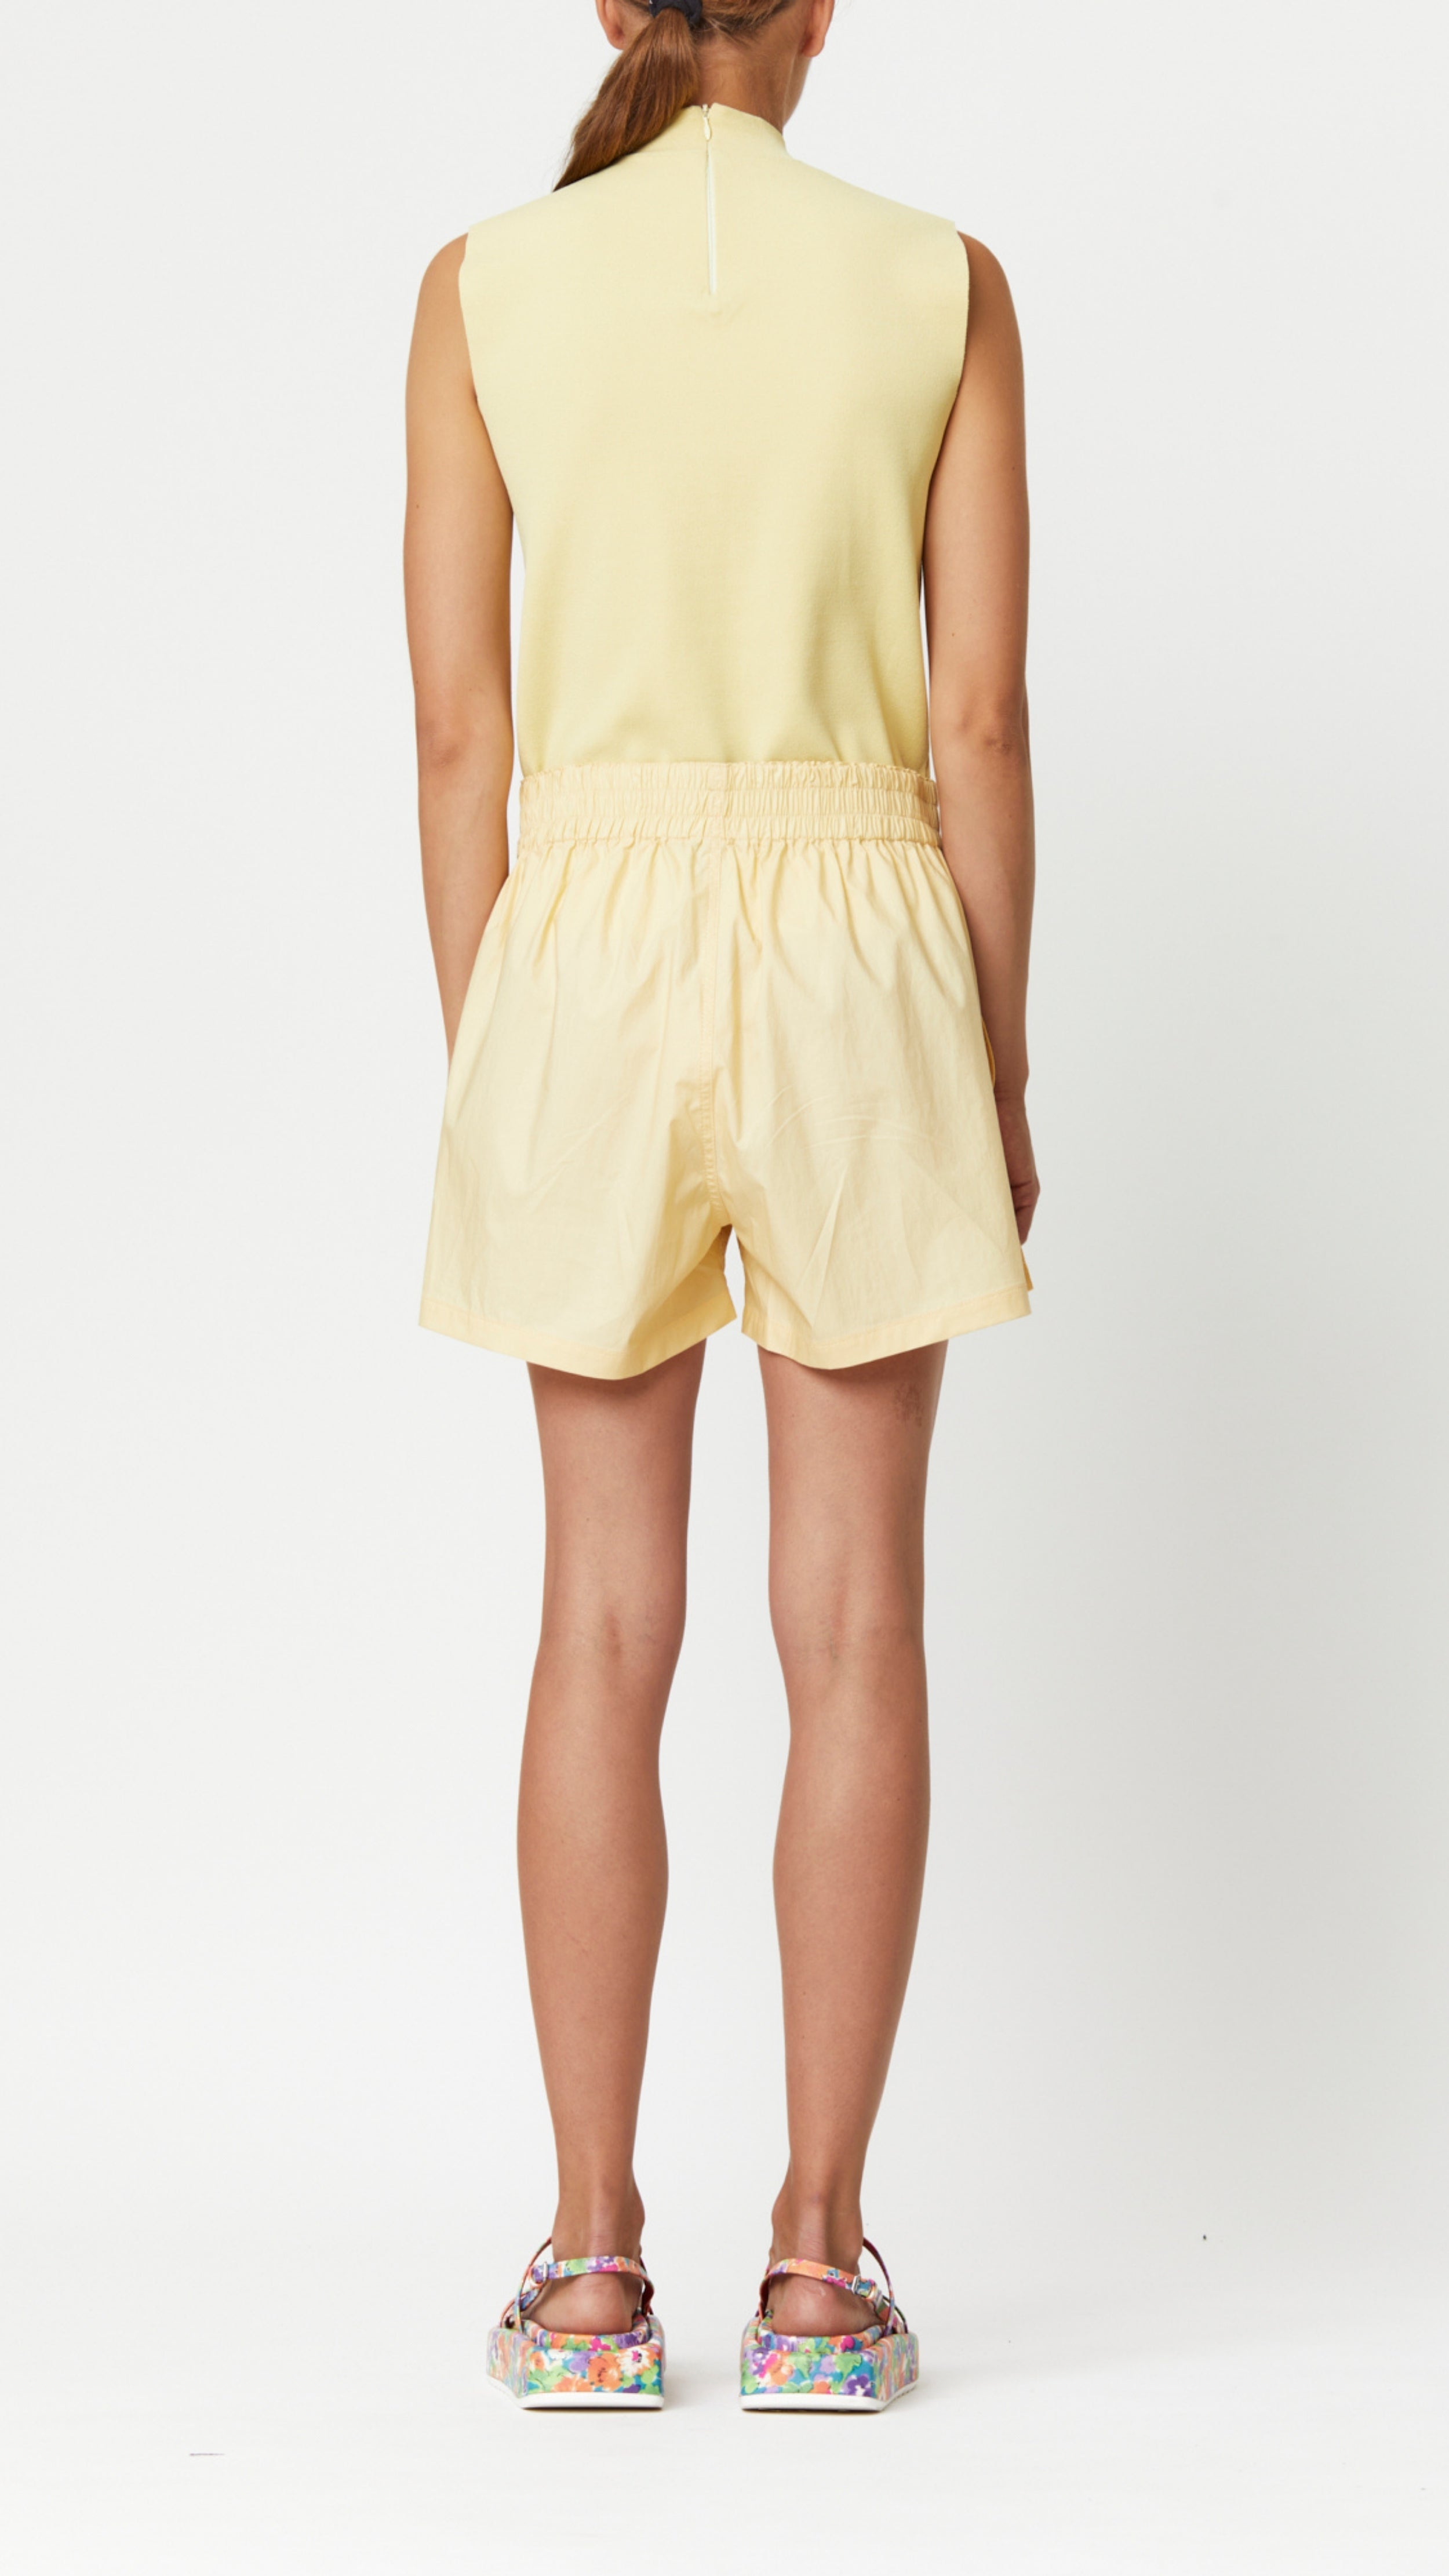 Plan C Eggnog Cotton Shorts. Crafted in 100% lightweight cotton in a pale yellow. they feature a relaxed fit, light-weight fabric, and a wide elastic waistband. Shown on model from the back.